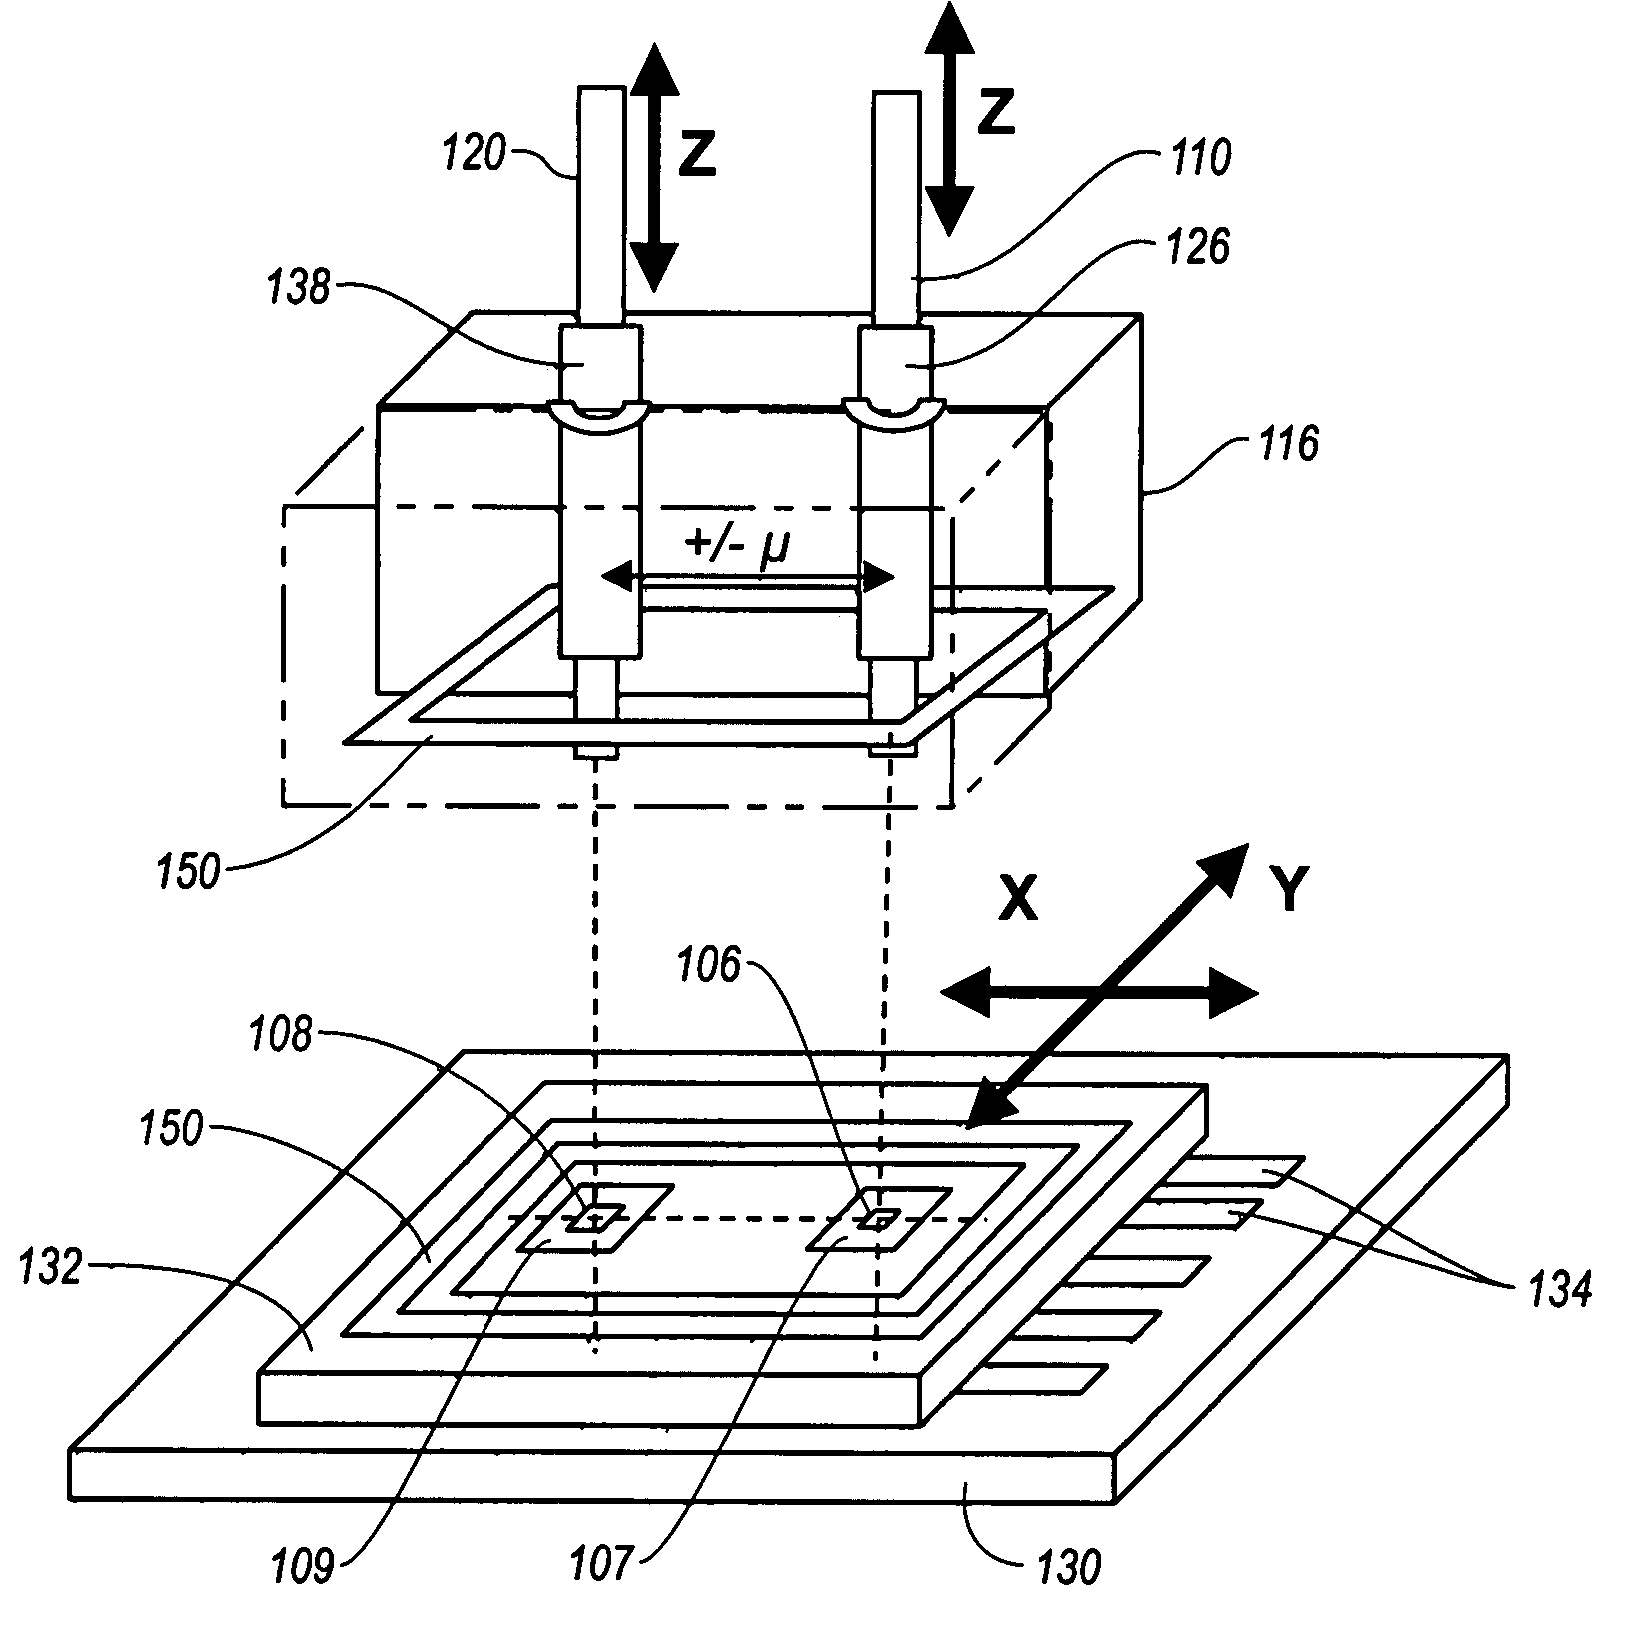 Optical connectors for electronic devices